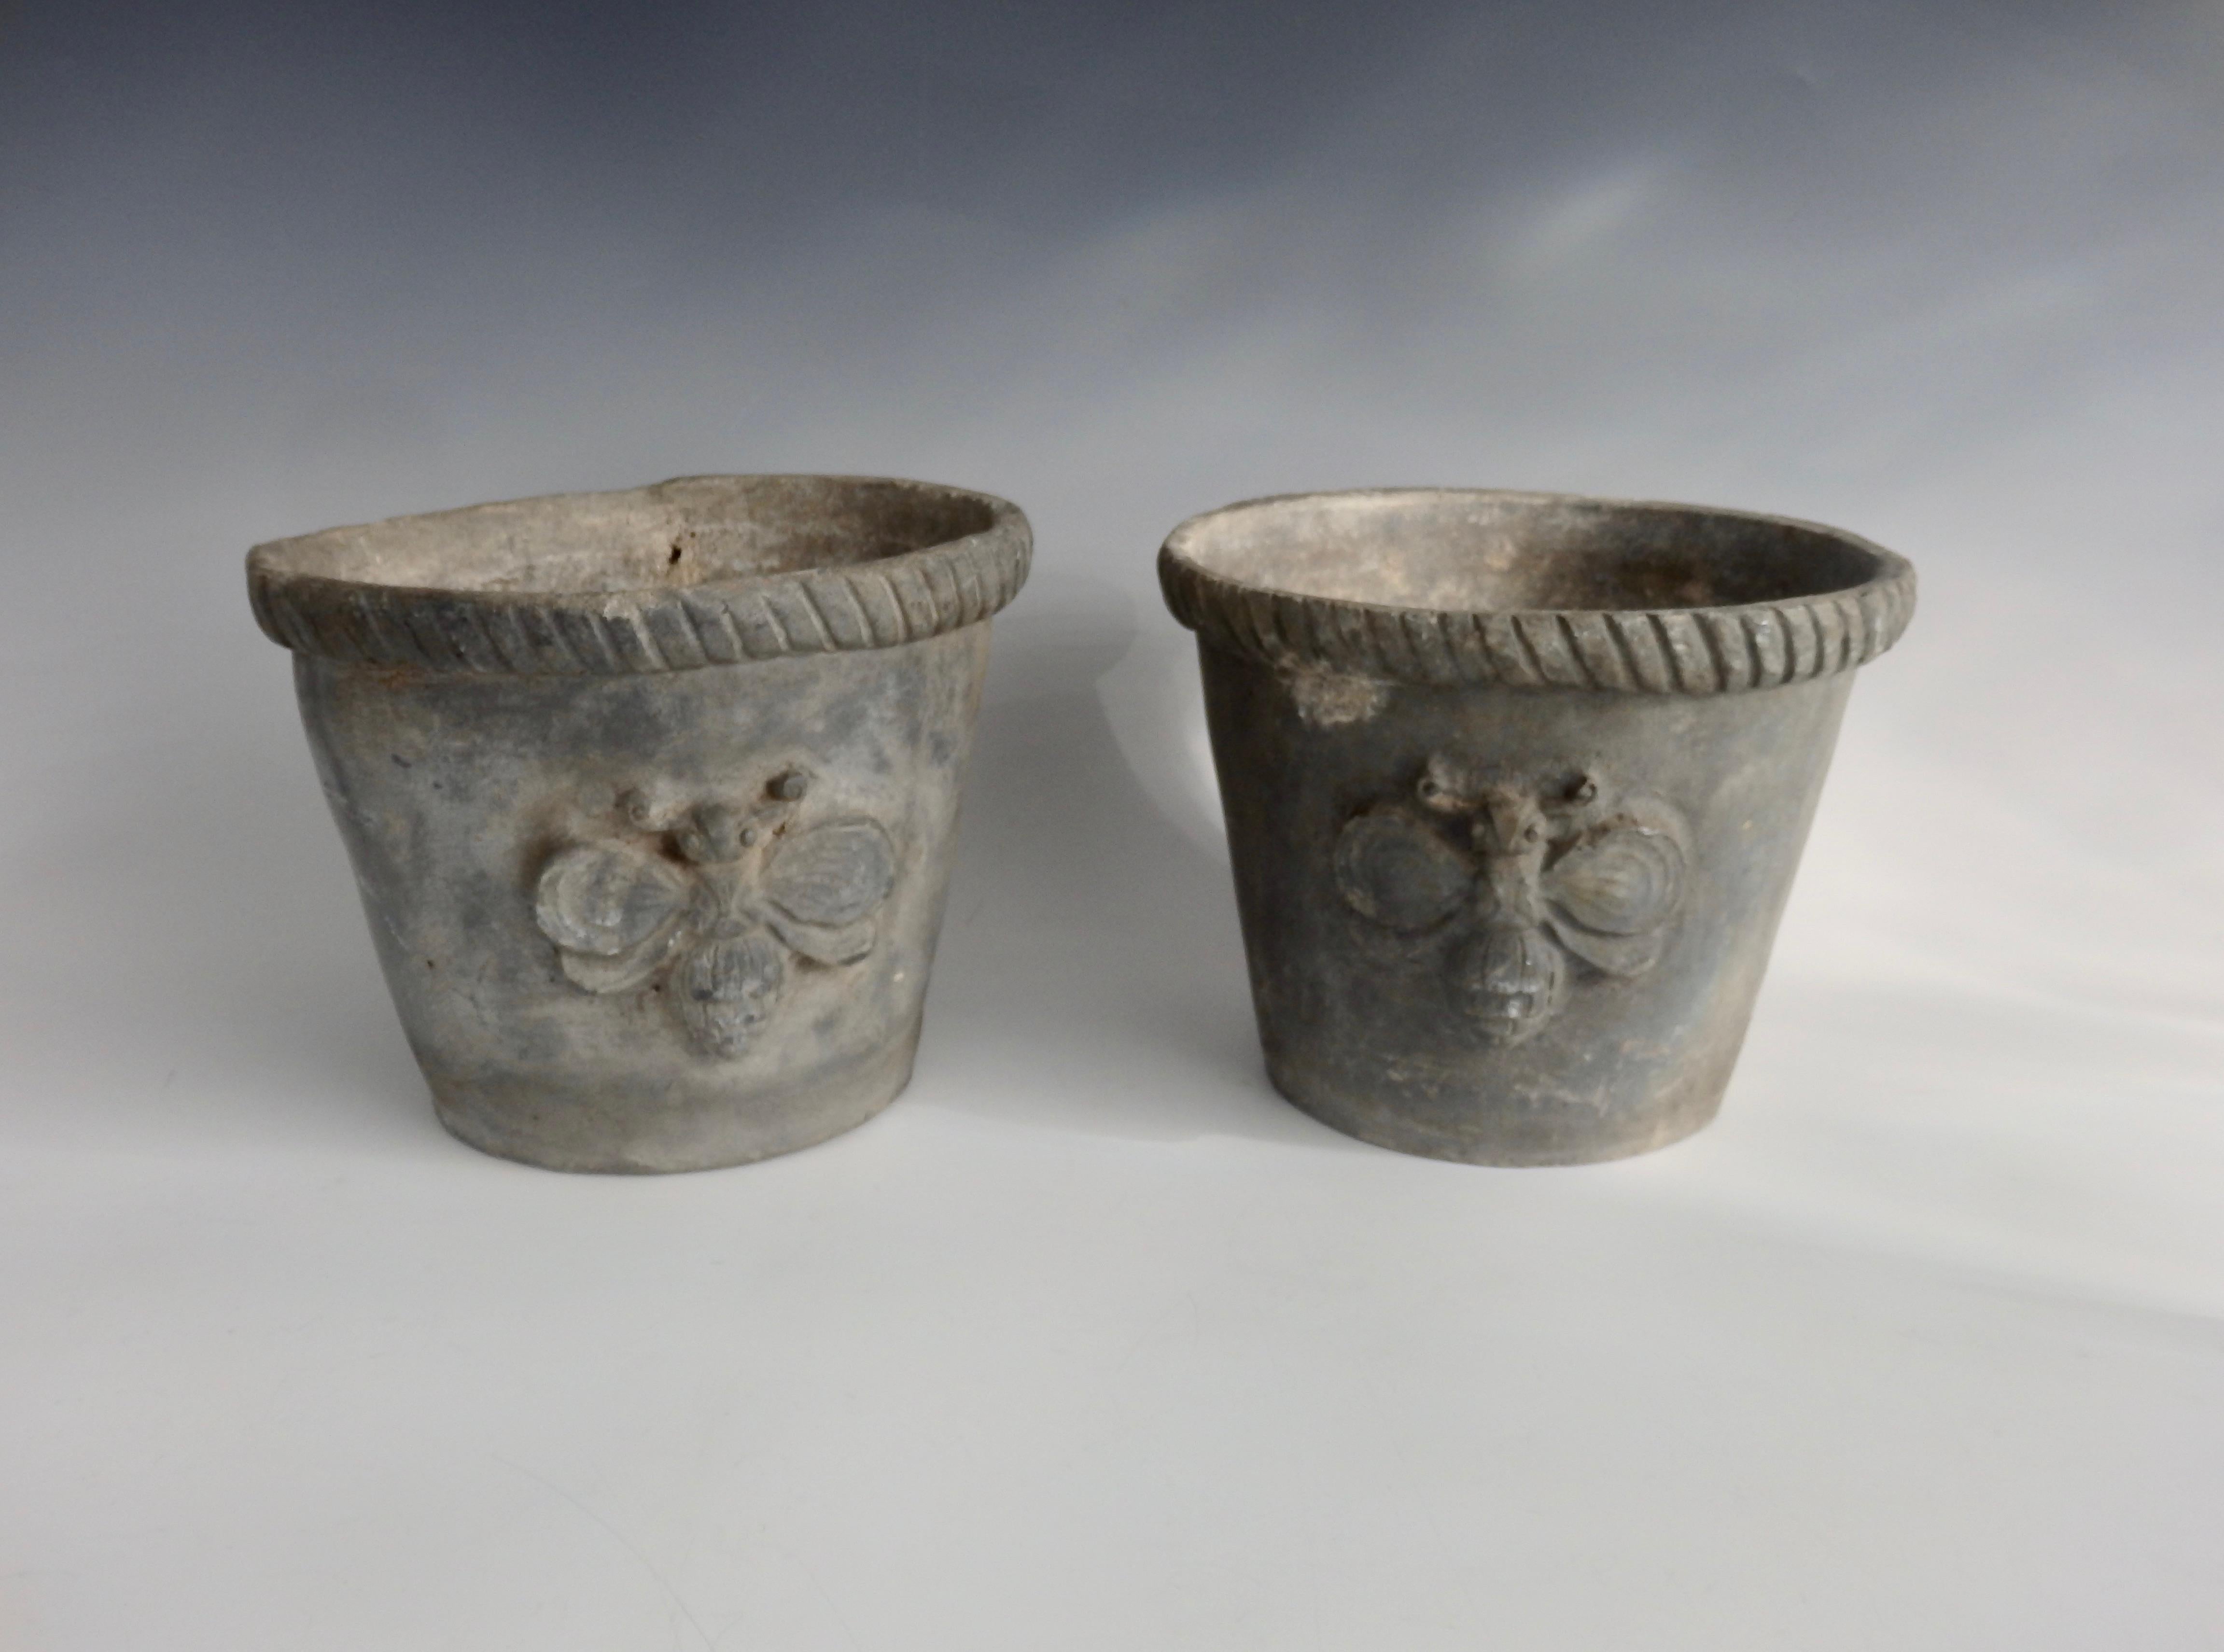 Pair of antique French garden pots in lead. Bumblebee design cast into each planter pot. Smaller third pot included.